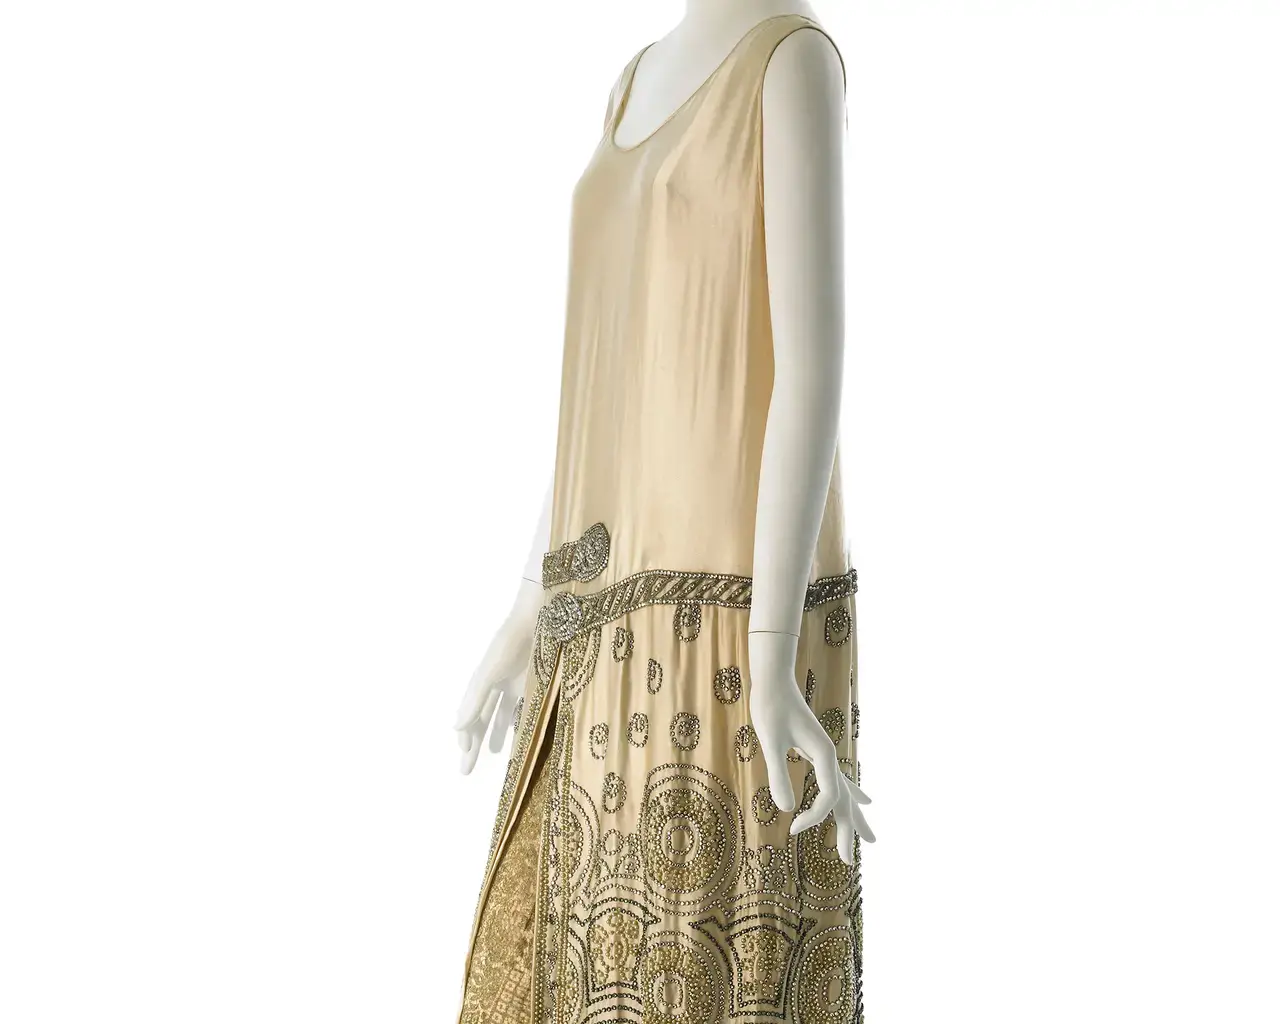 Worth, Evening Dress, 1924-27, ivory satin, silver metallic machine-made lace, mine-cut brilliants. Photo courtesy of the Museum of the City of New York.